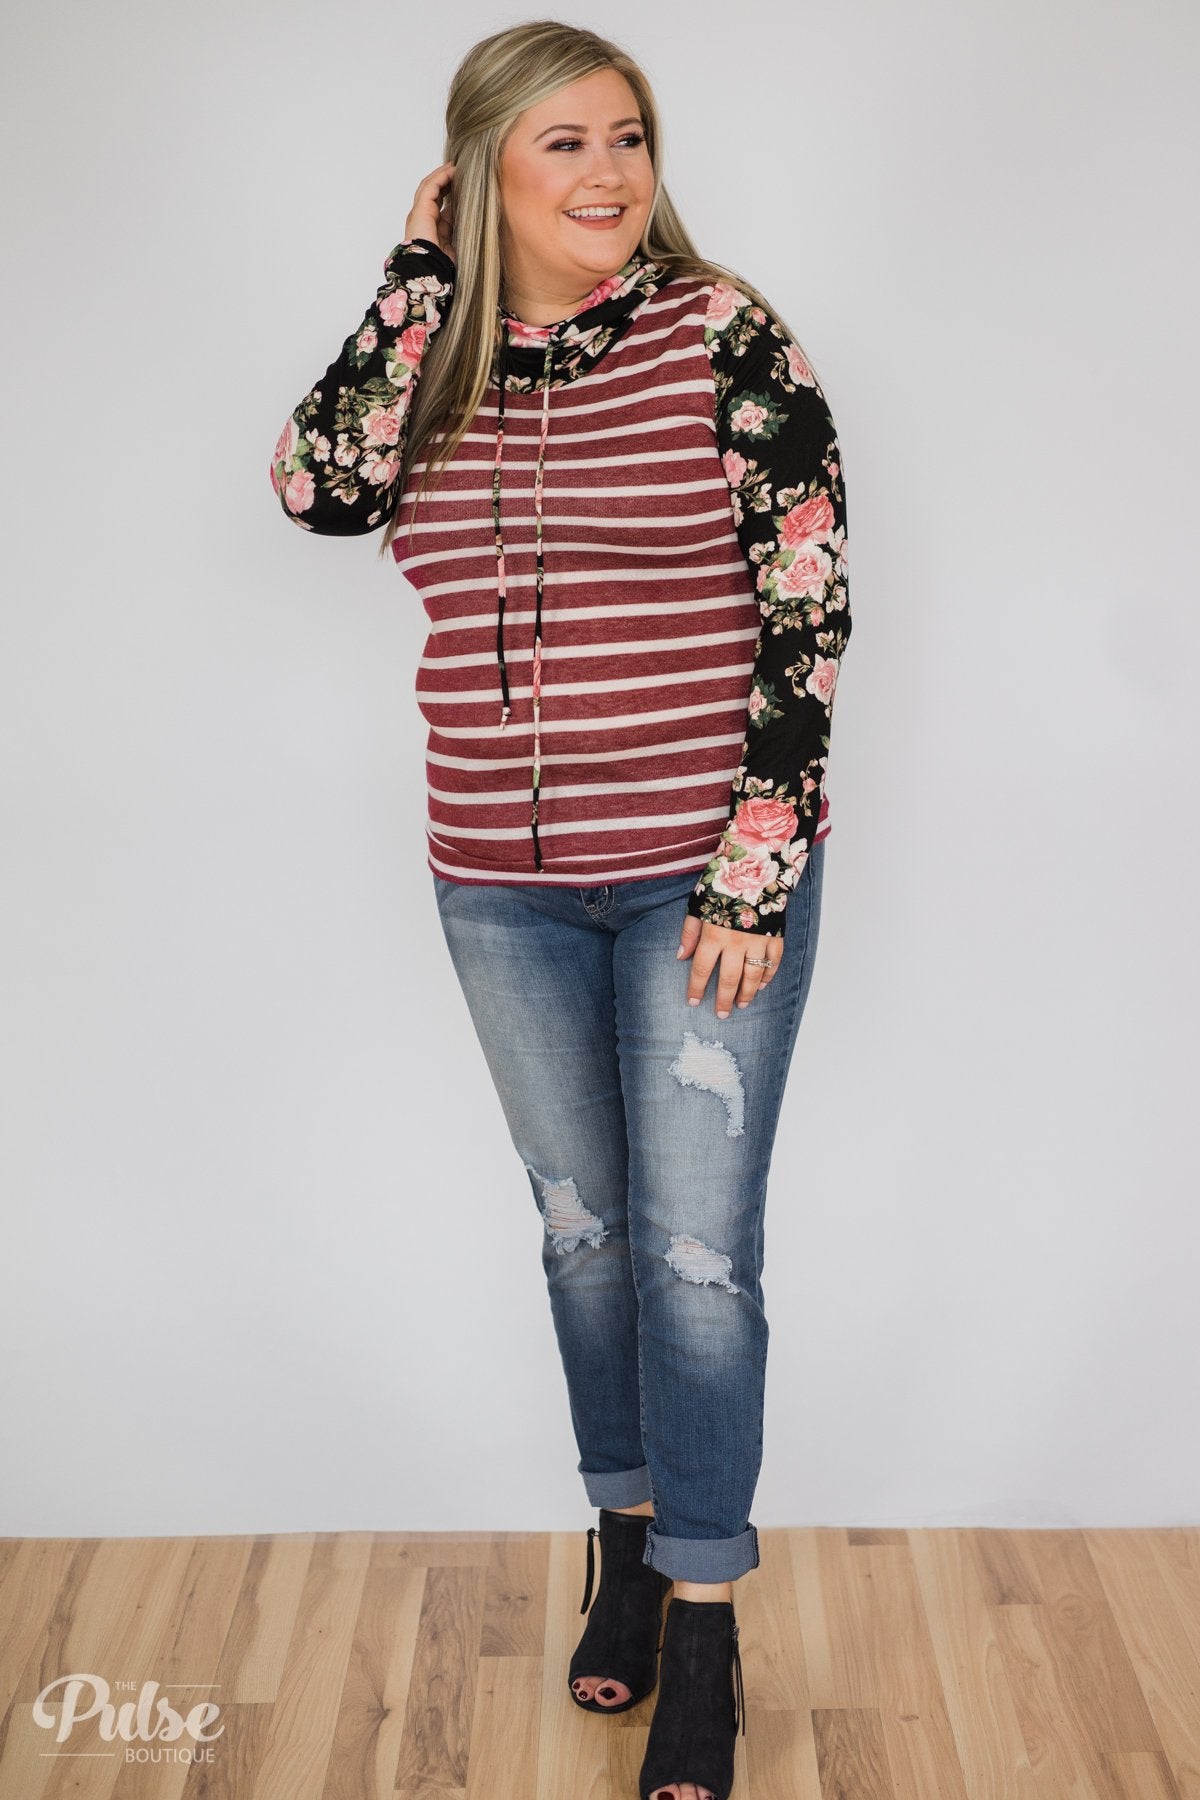 Pure Beauty Floral & Striped Cowl Neck Top- Black & Burgundy